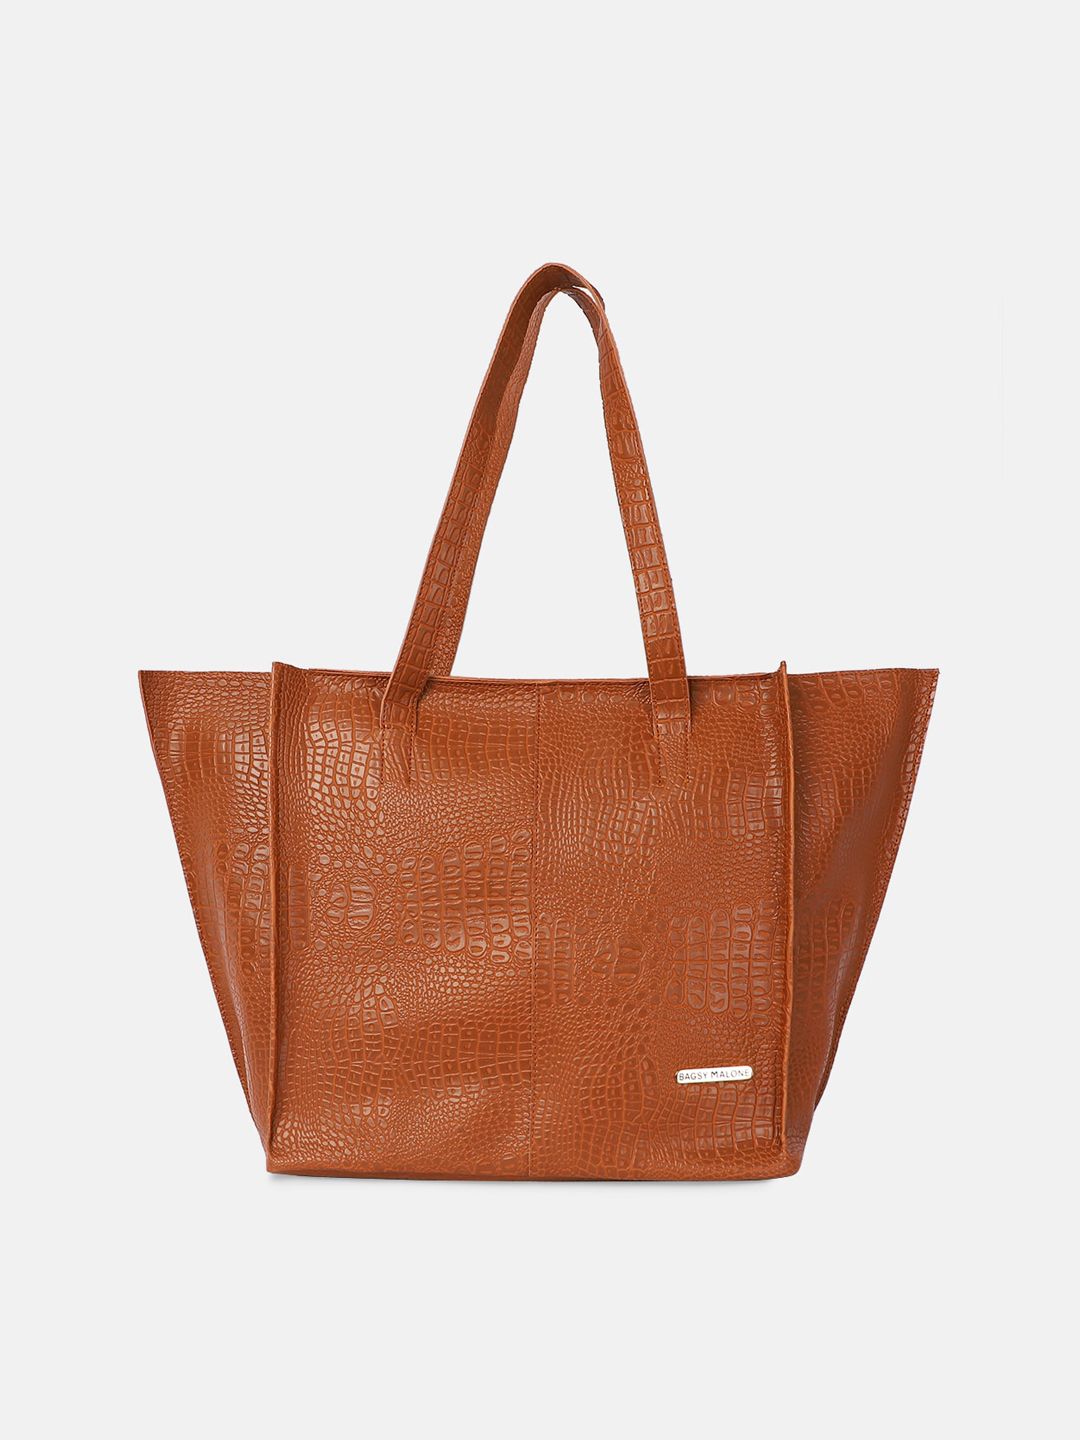 Bagsy Malone Tan Textured Shopper Shoulder Bag Price in India